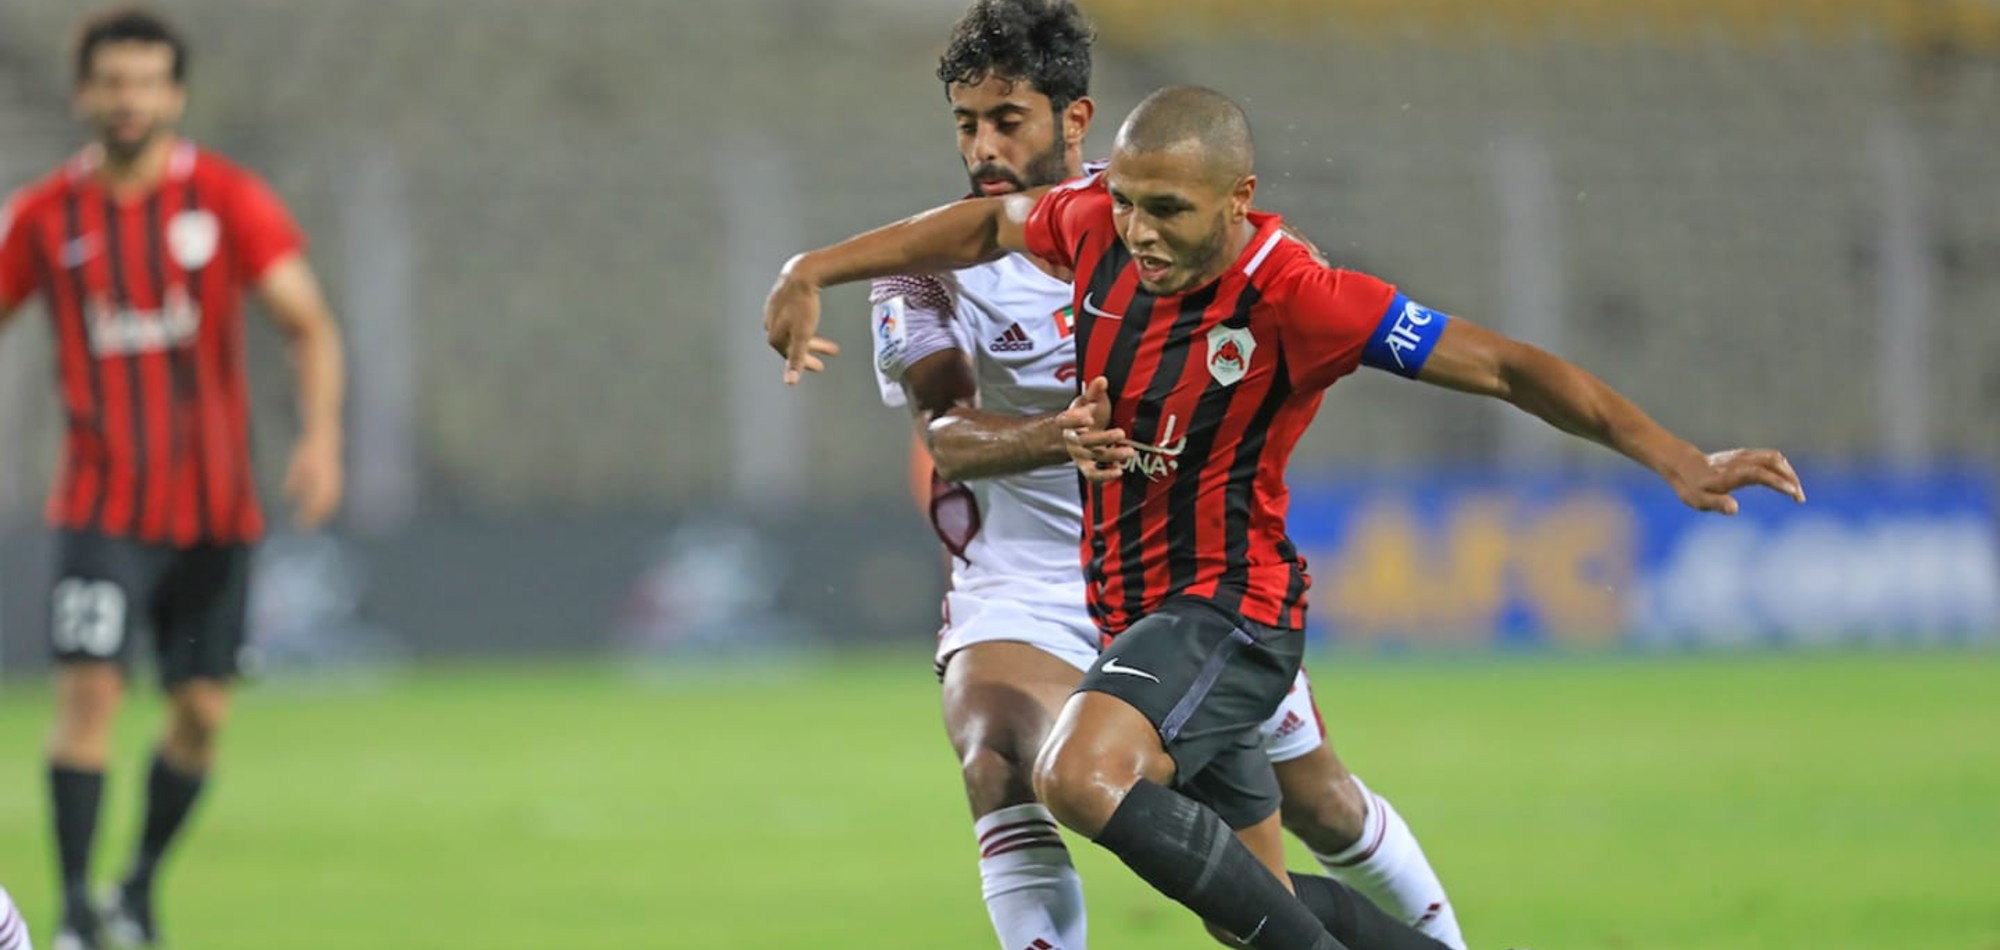 Al Rayyan out to revive AFC Champions League hopes against Al Wahda